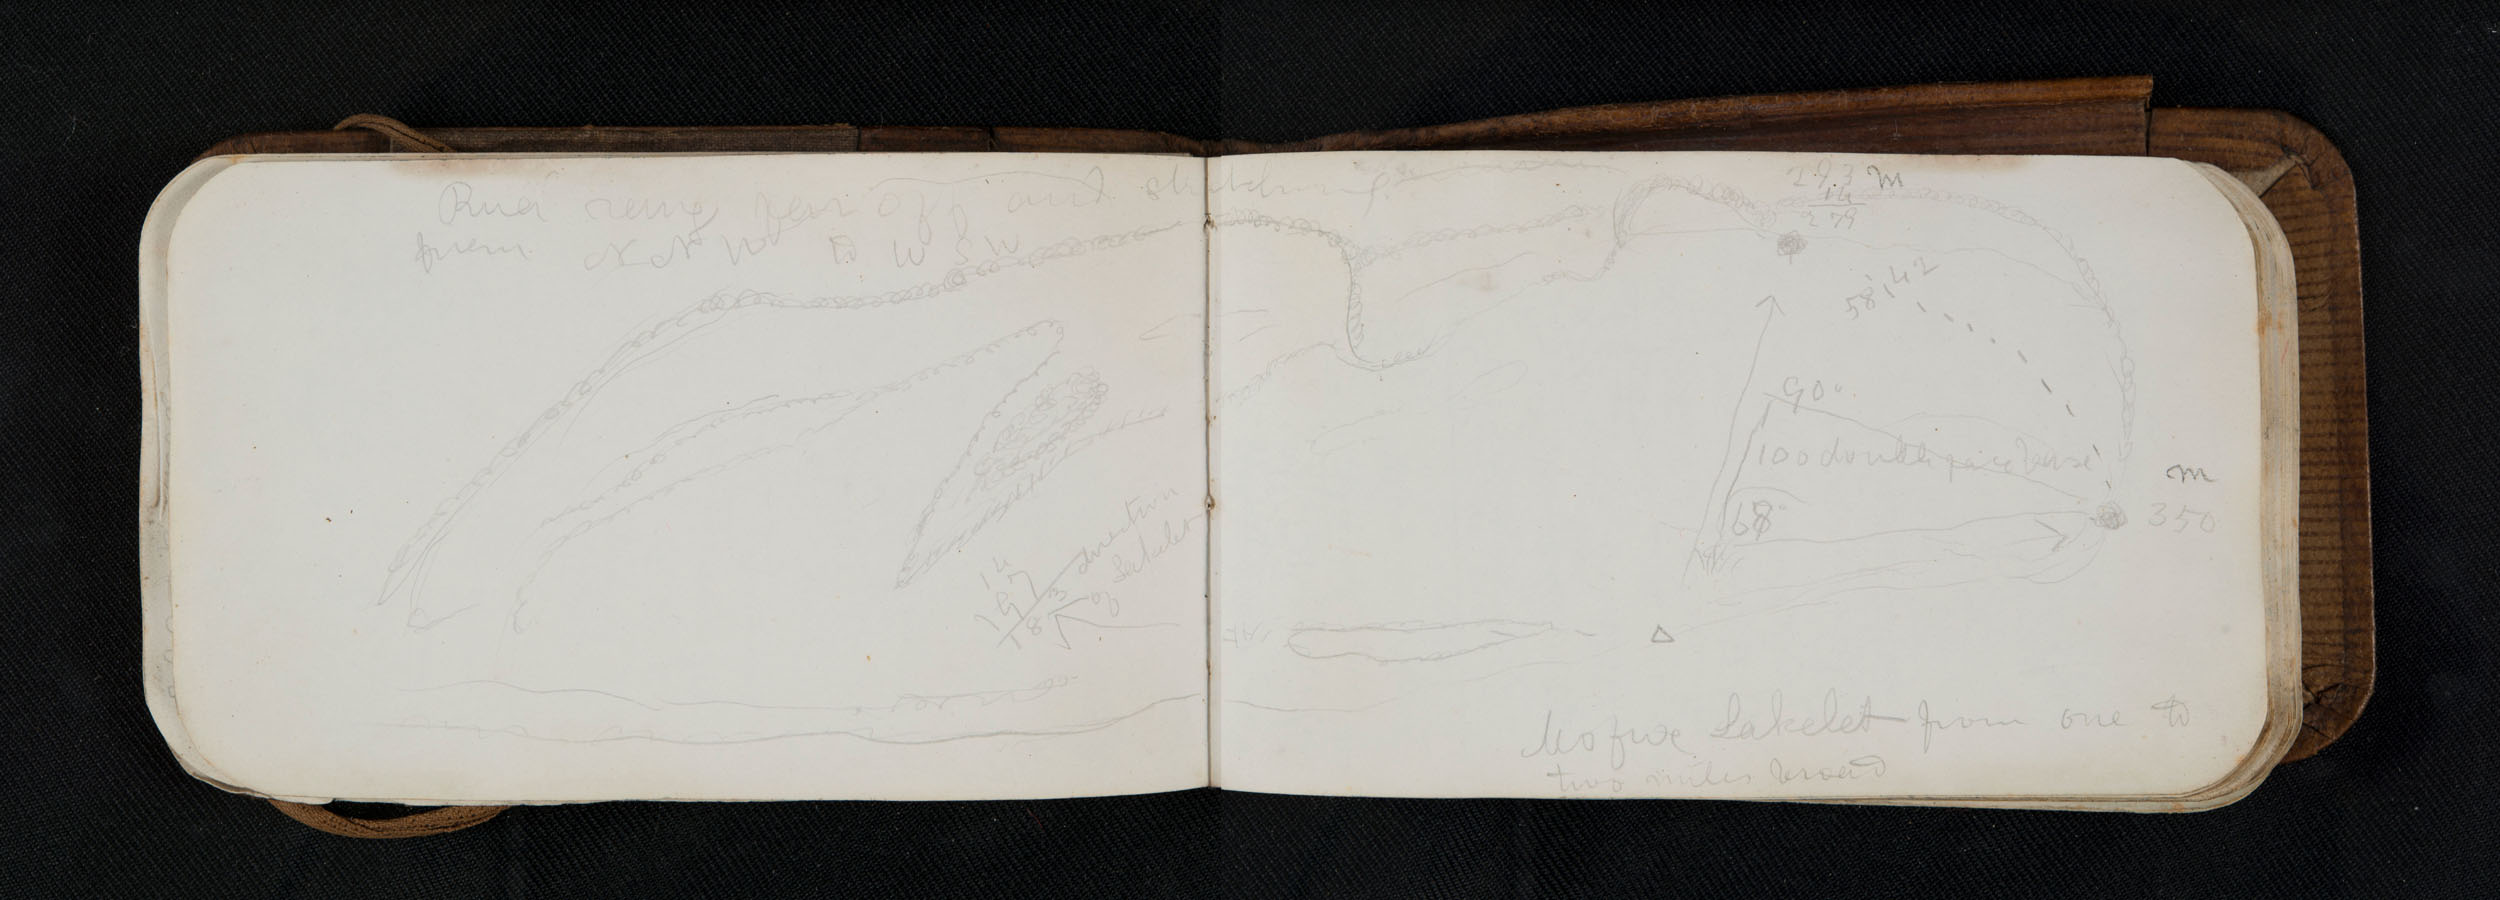 An image of two pages of Field Diary X (Livingstone 1867c:[88]-[89]). Copyright David Livingstone Centre. Creative Commons Attribution-NonCommercial 3.0 Unported (https://creativecommons.org/licenses/by-nc/3.0/).